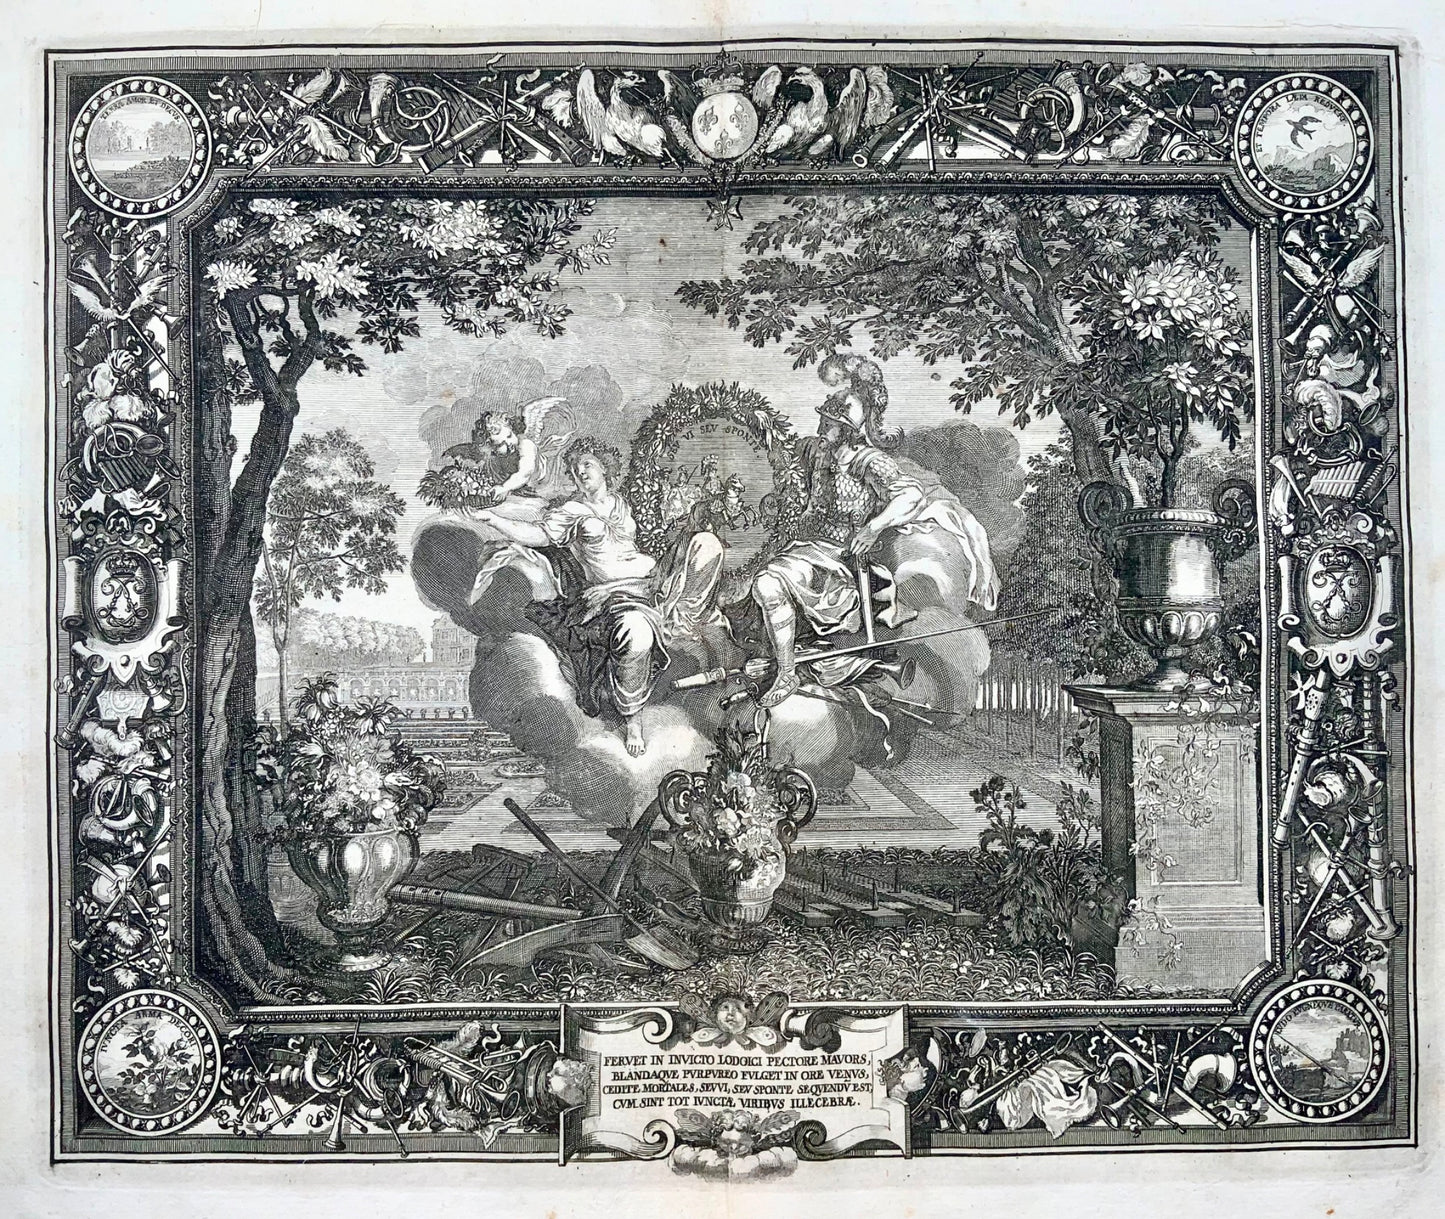 1679 Spring, double page allegorical tapestry engraving, Le Brun; Le Clerc, bota